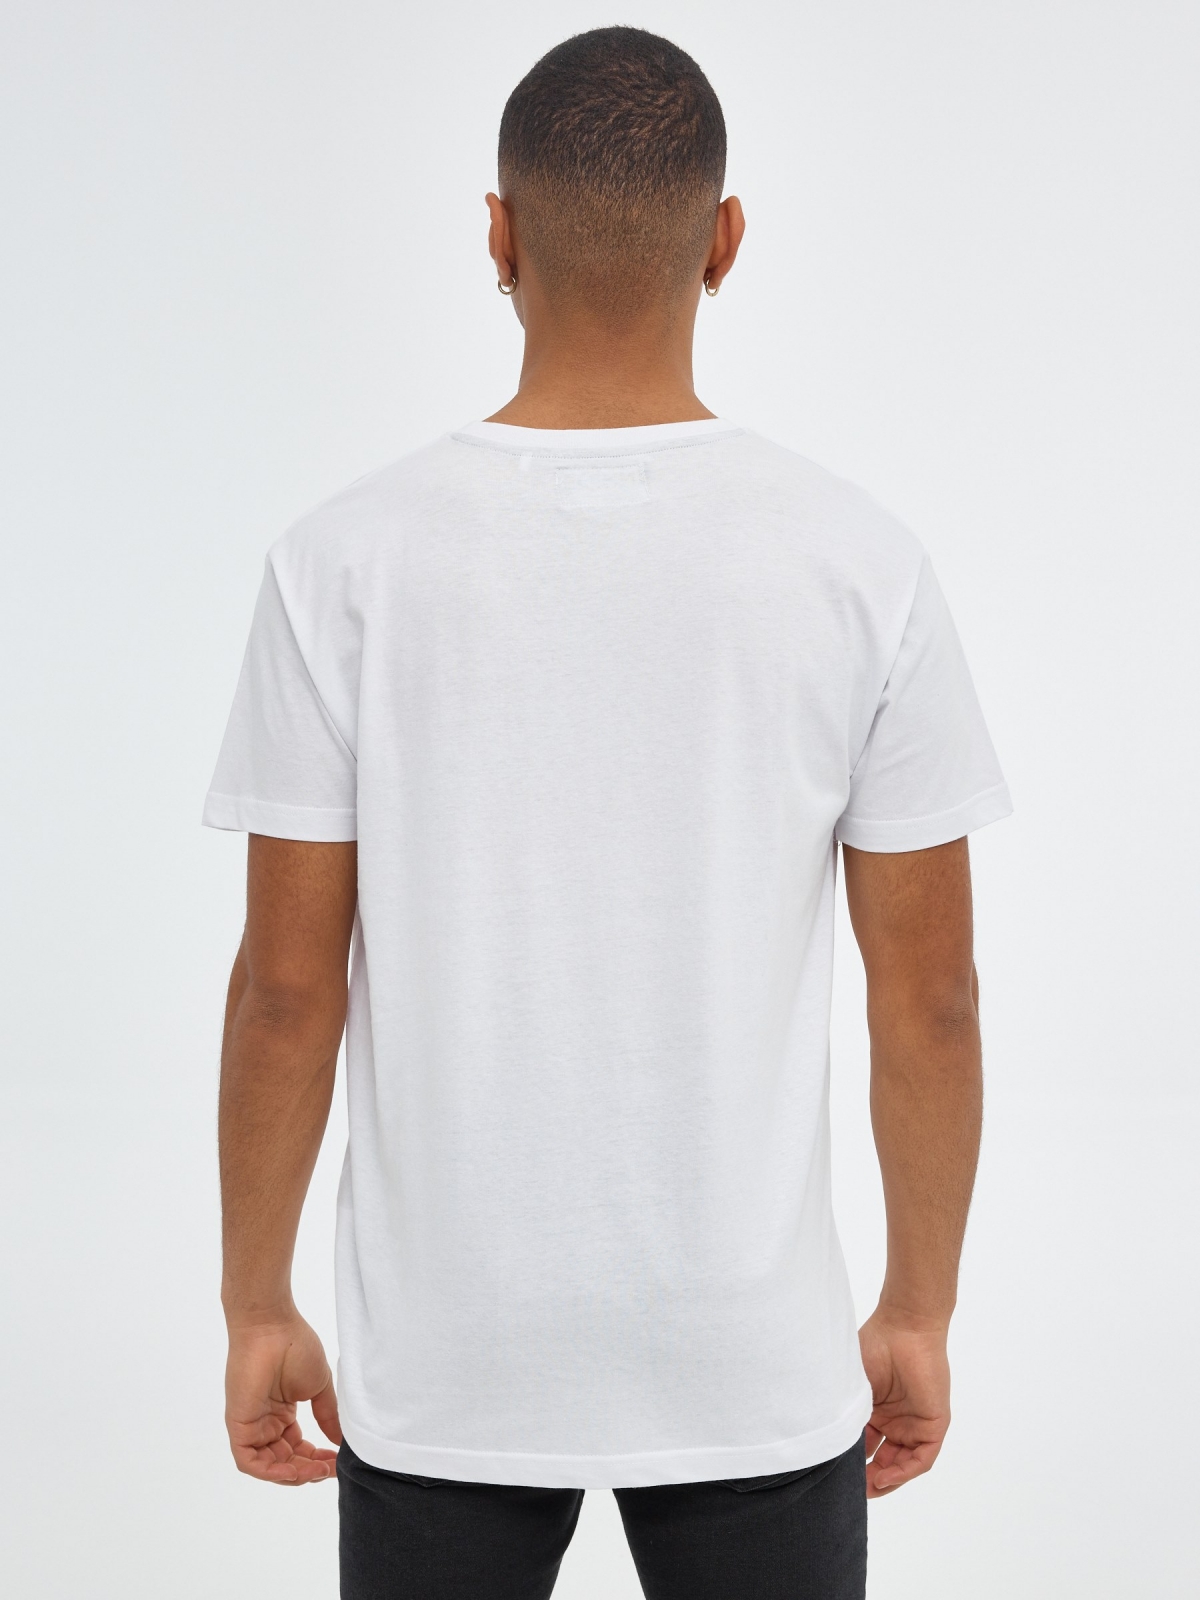 Graphic T-shirt with pocket white middle back view